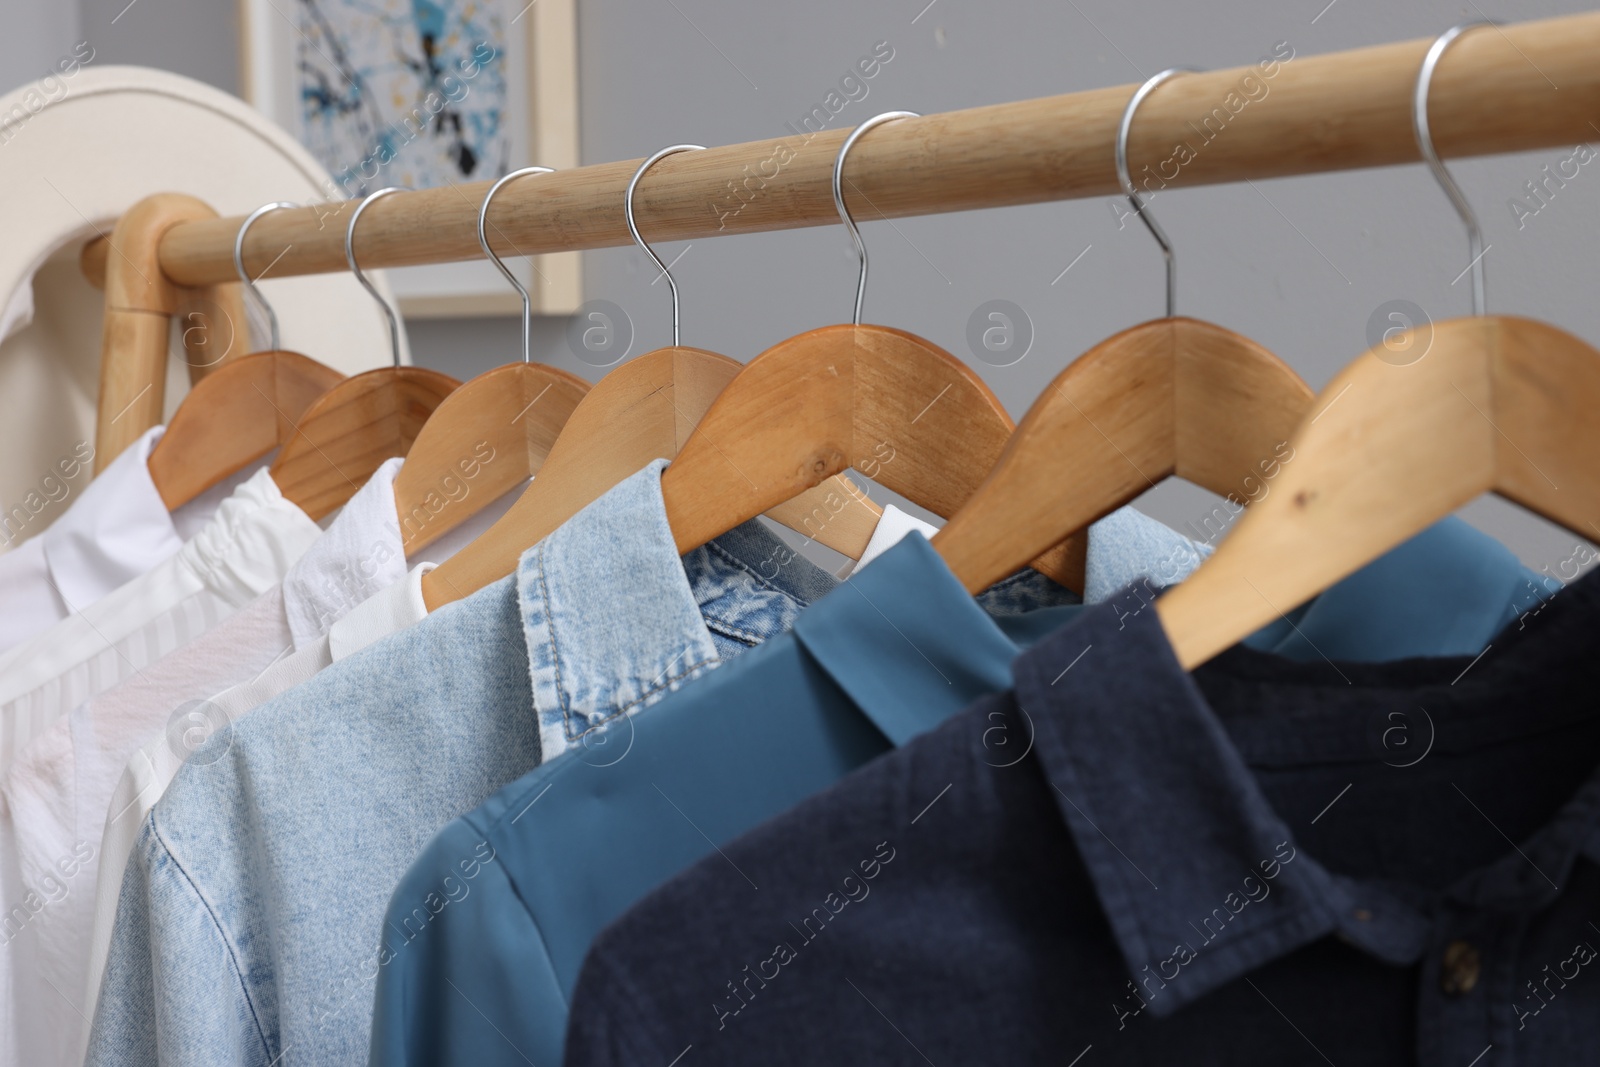 Photo of Rack with different stylish shirts on wooden hangers against grey background, closeup. Organizing clothes